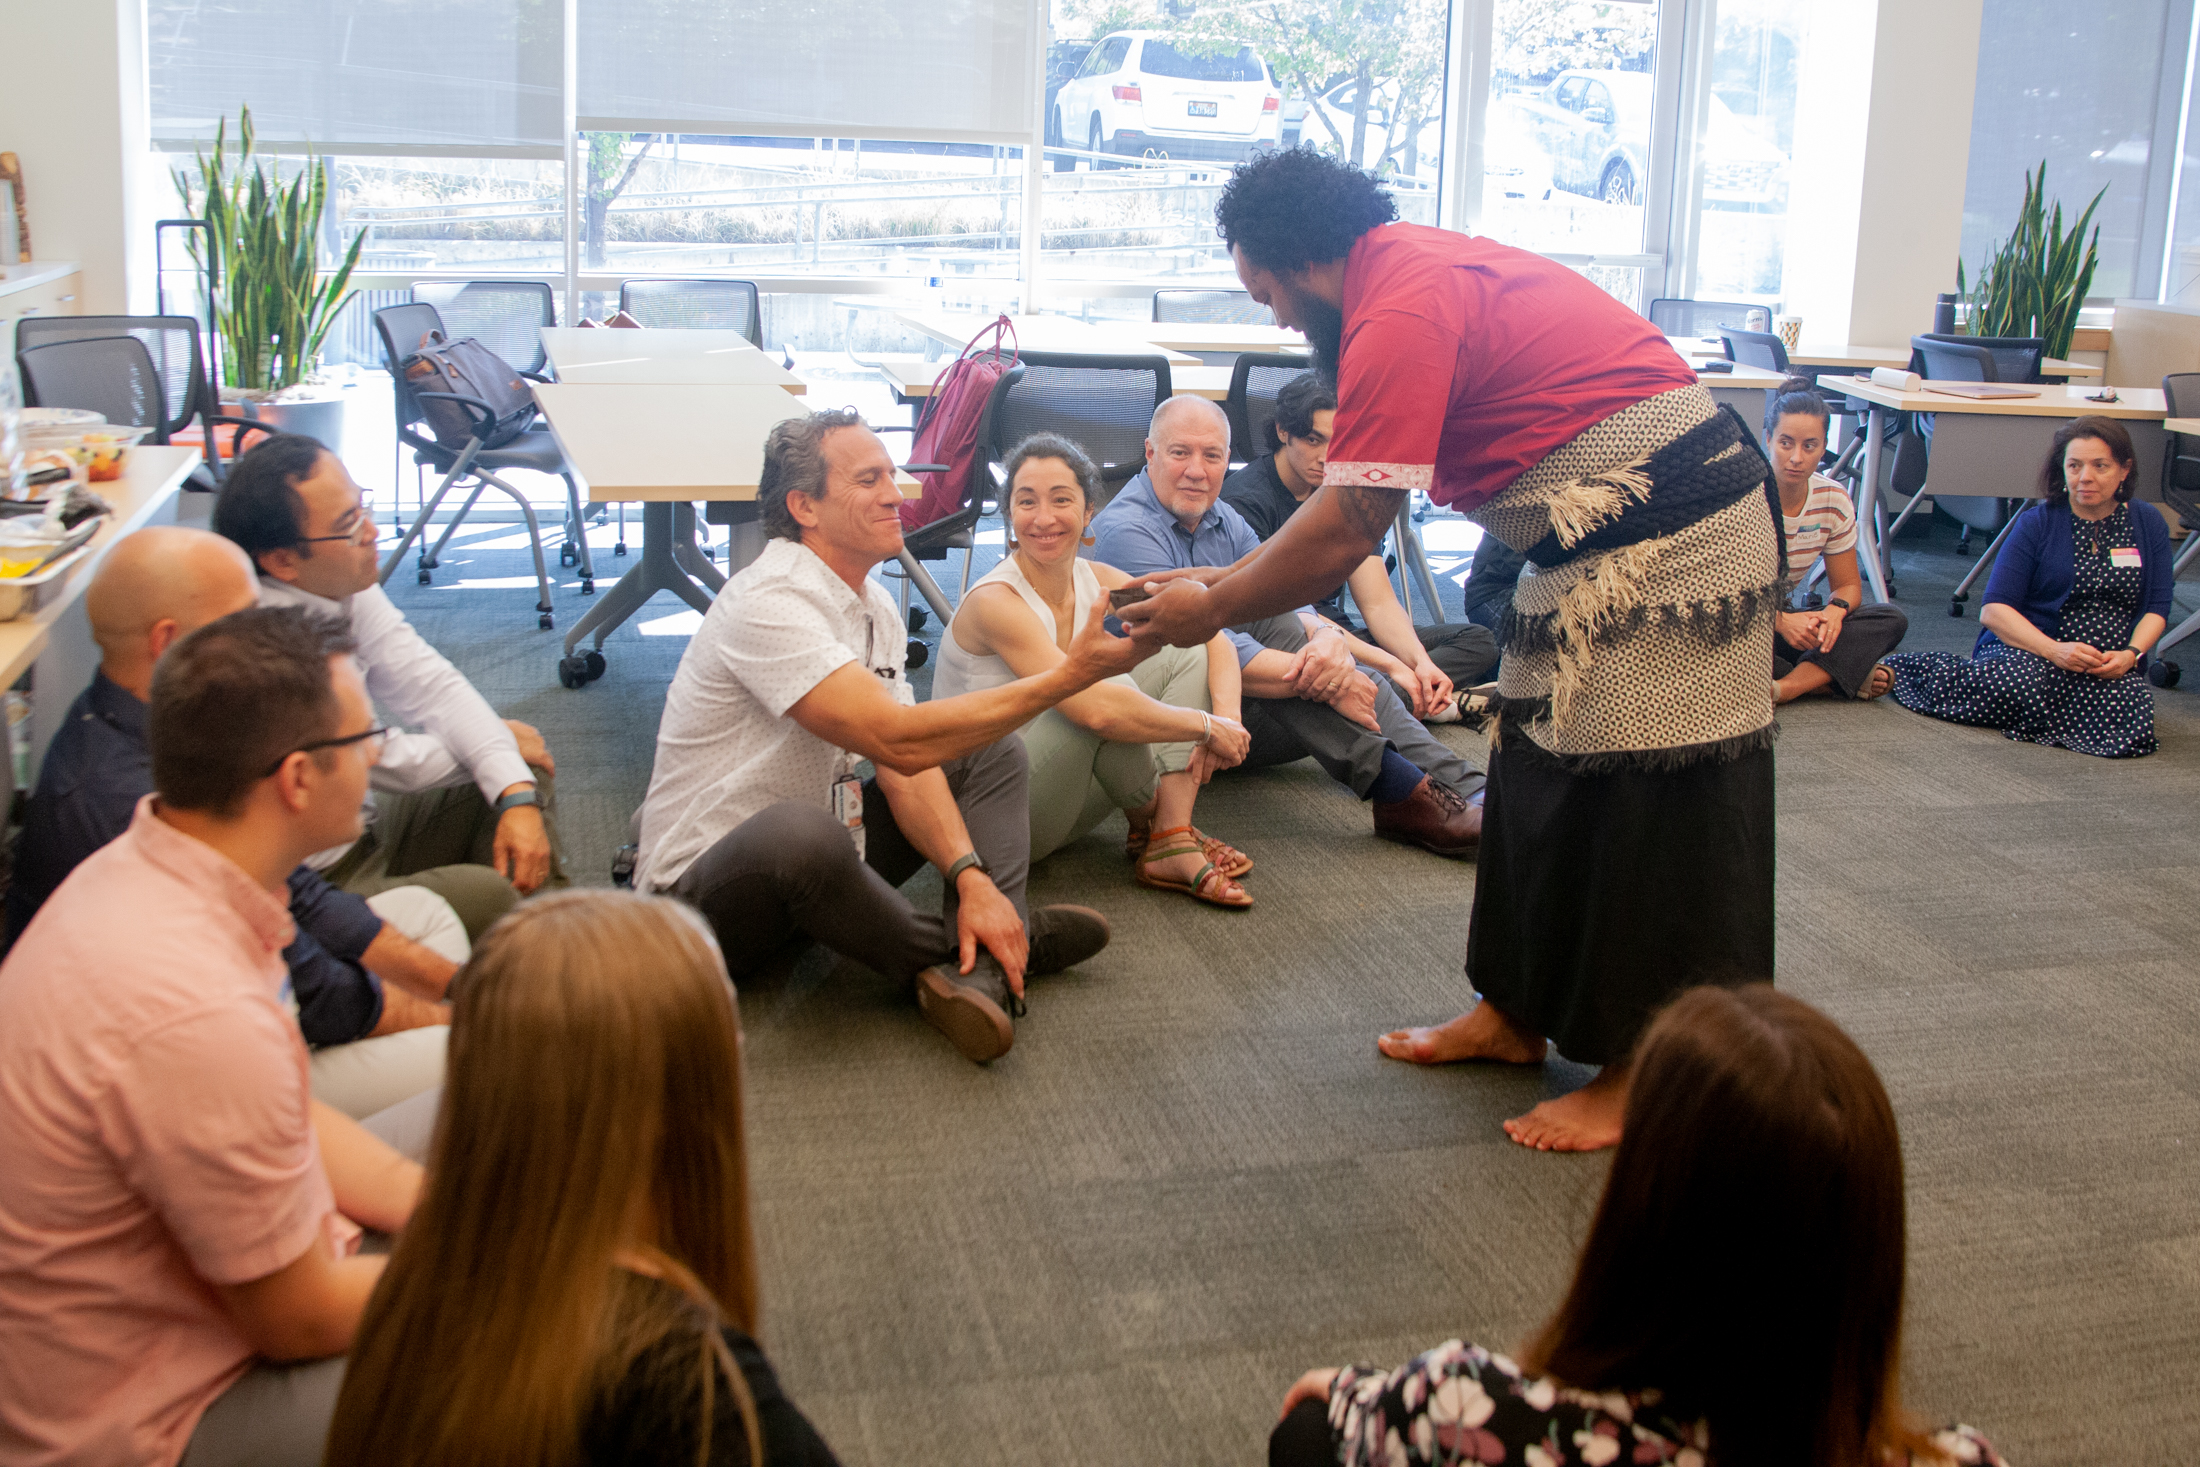 A traditional kava ceremony during the program’s summer kickoff event